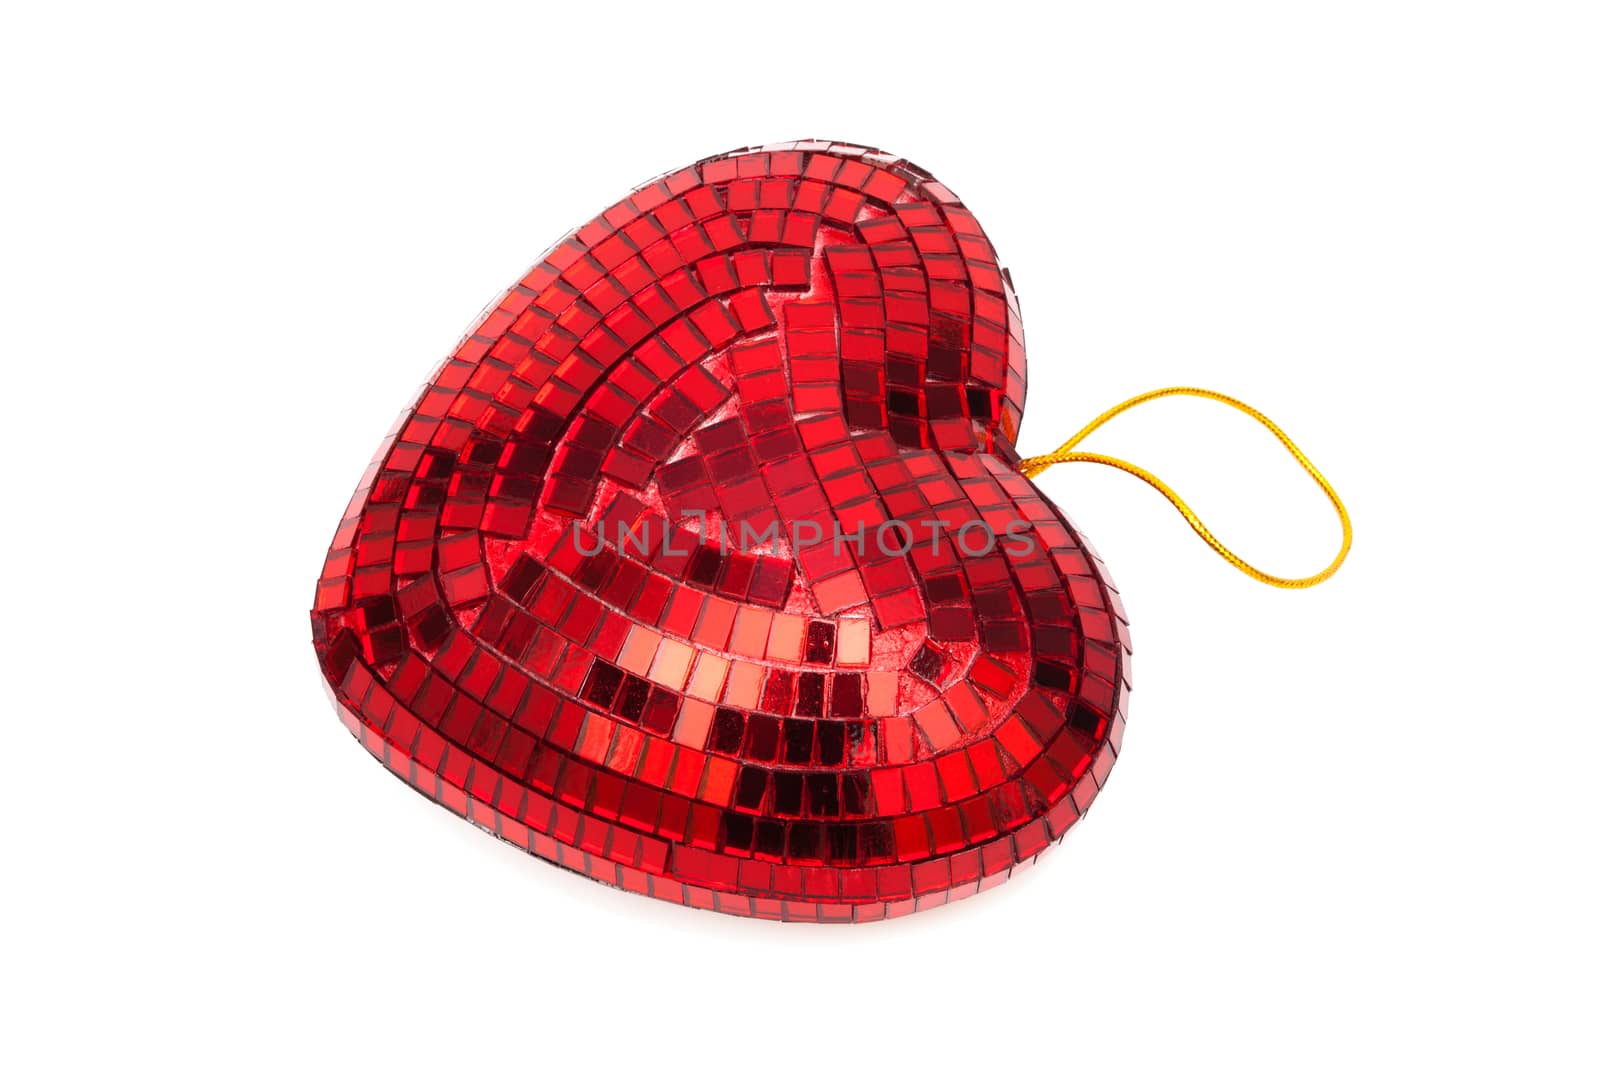 red heart as a decoration on white background